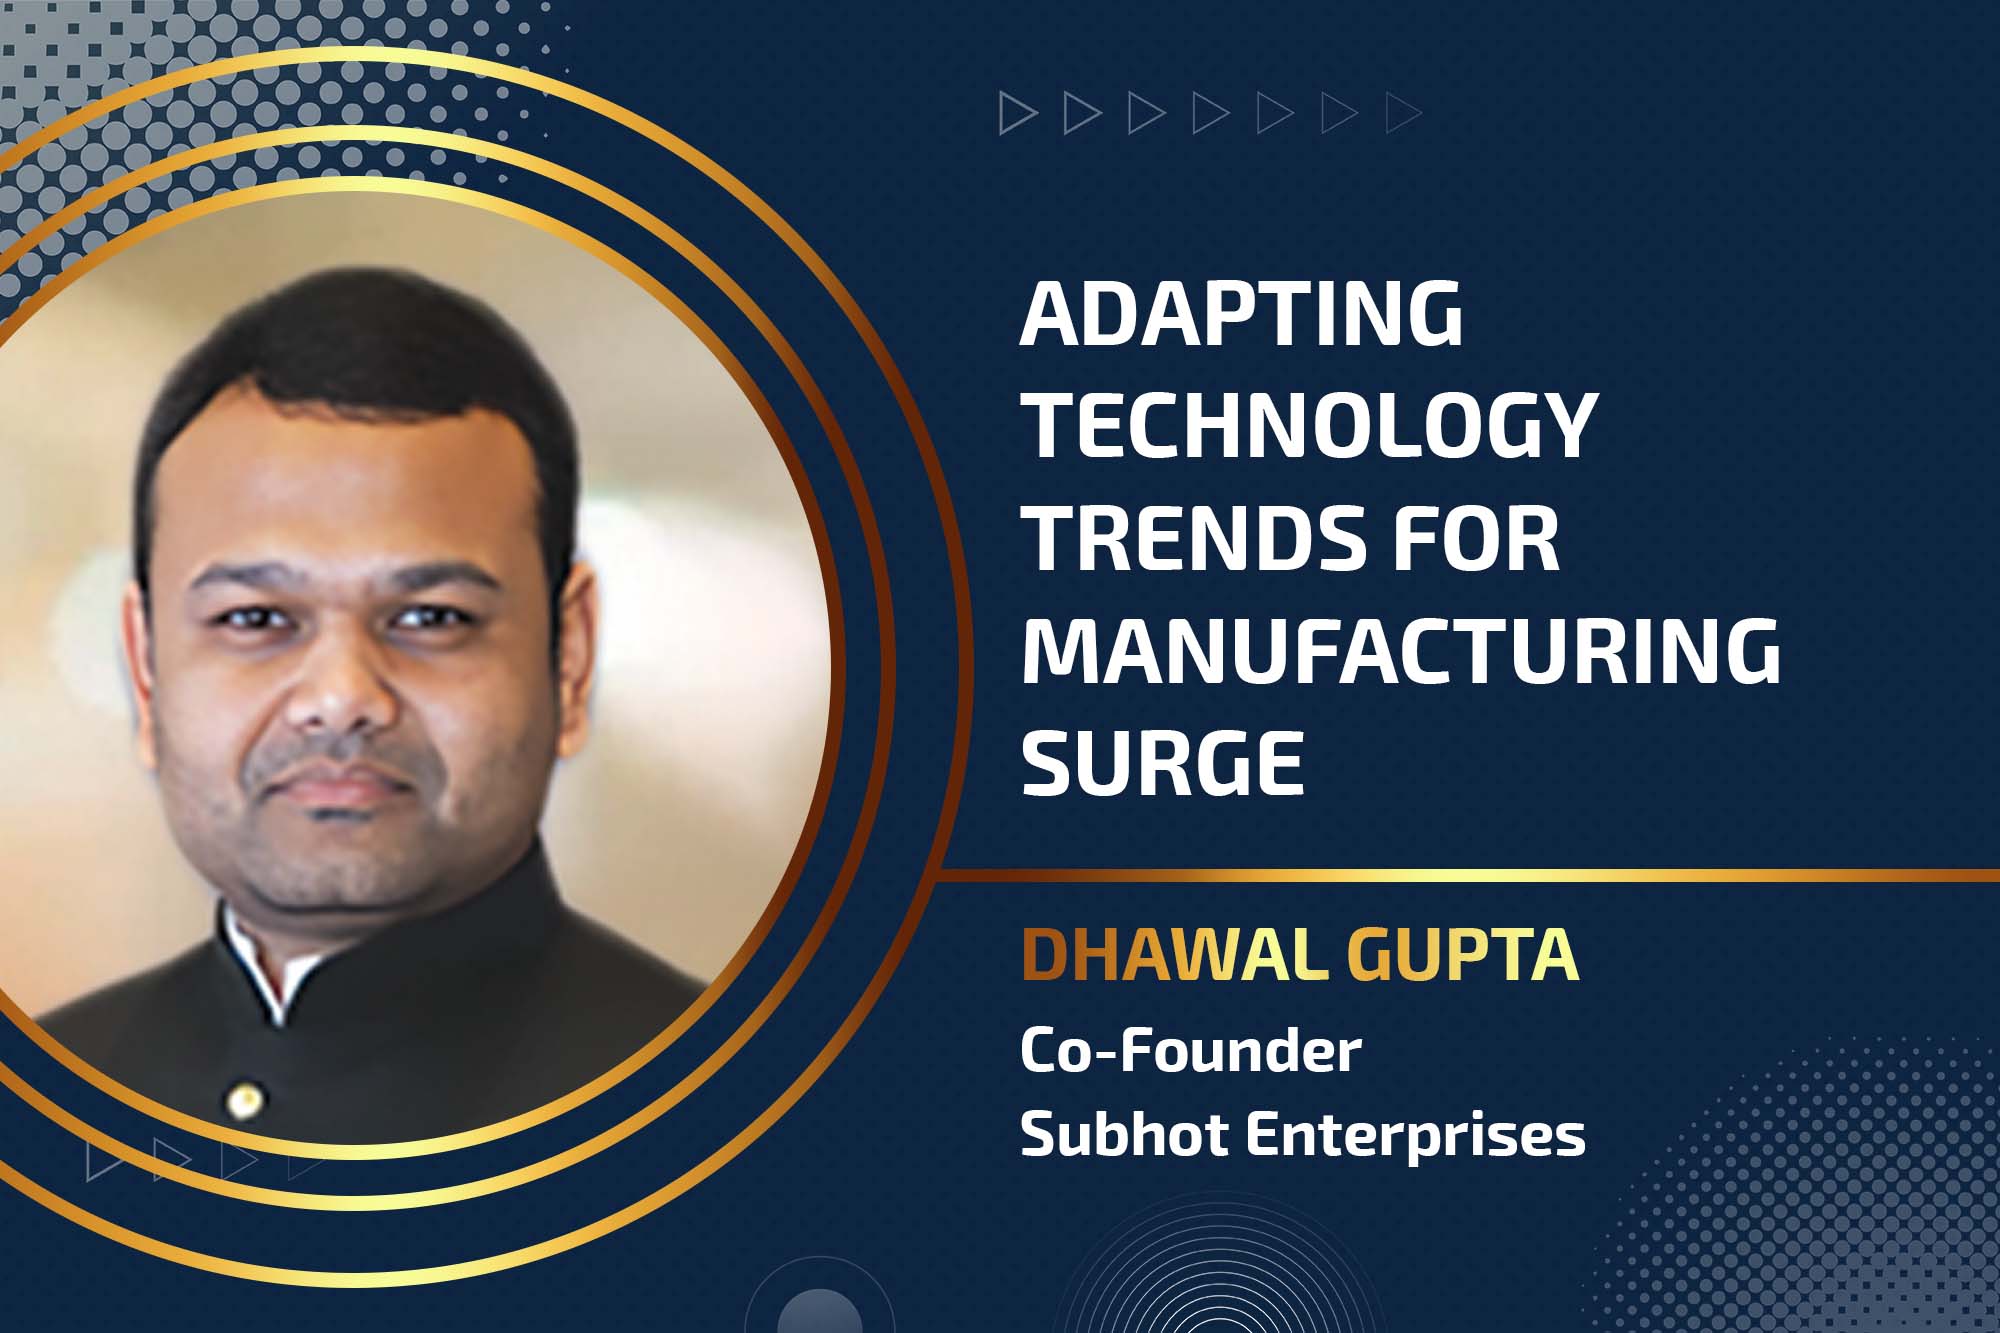 Adapting technology trends for manufacturing surge